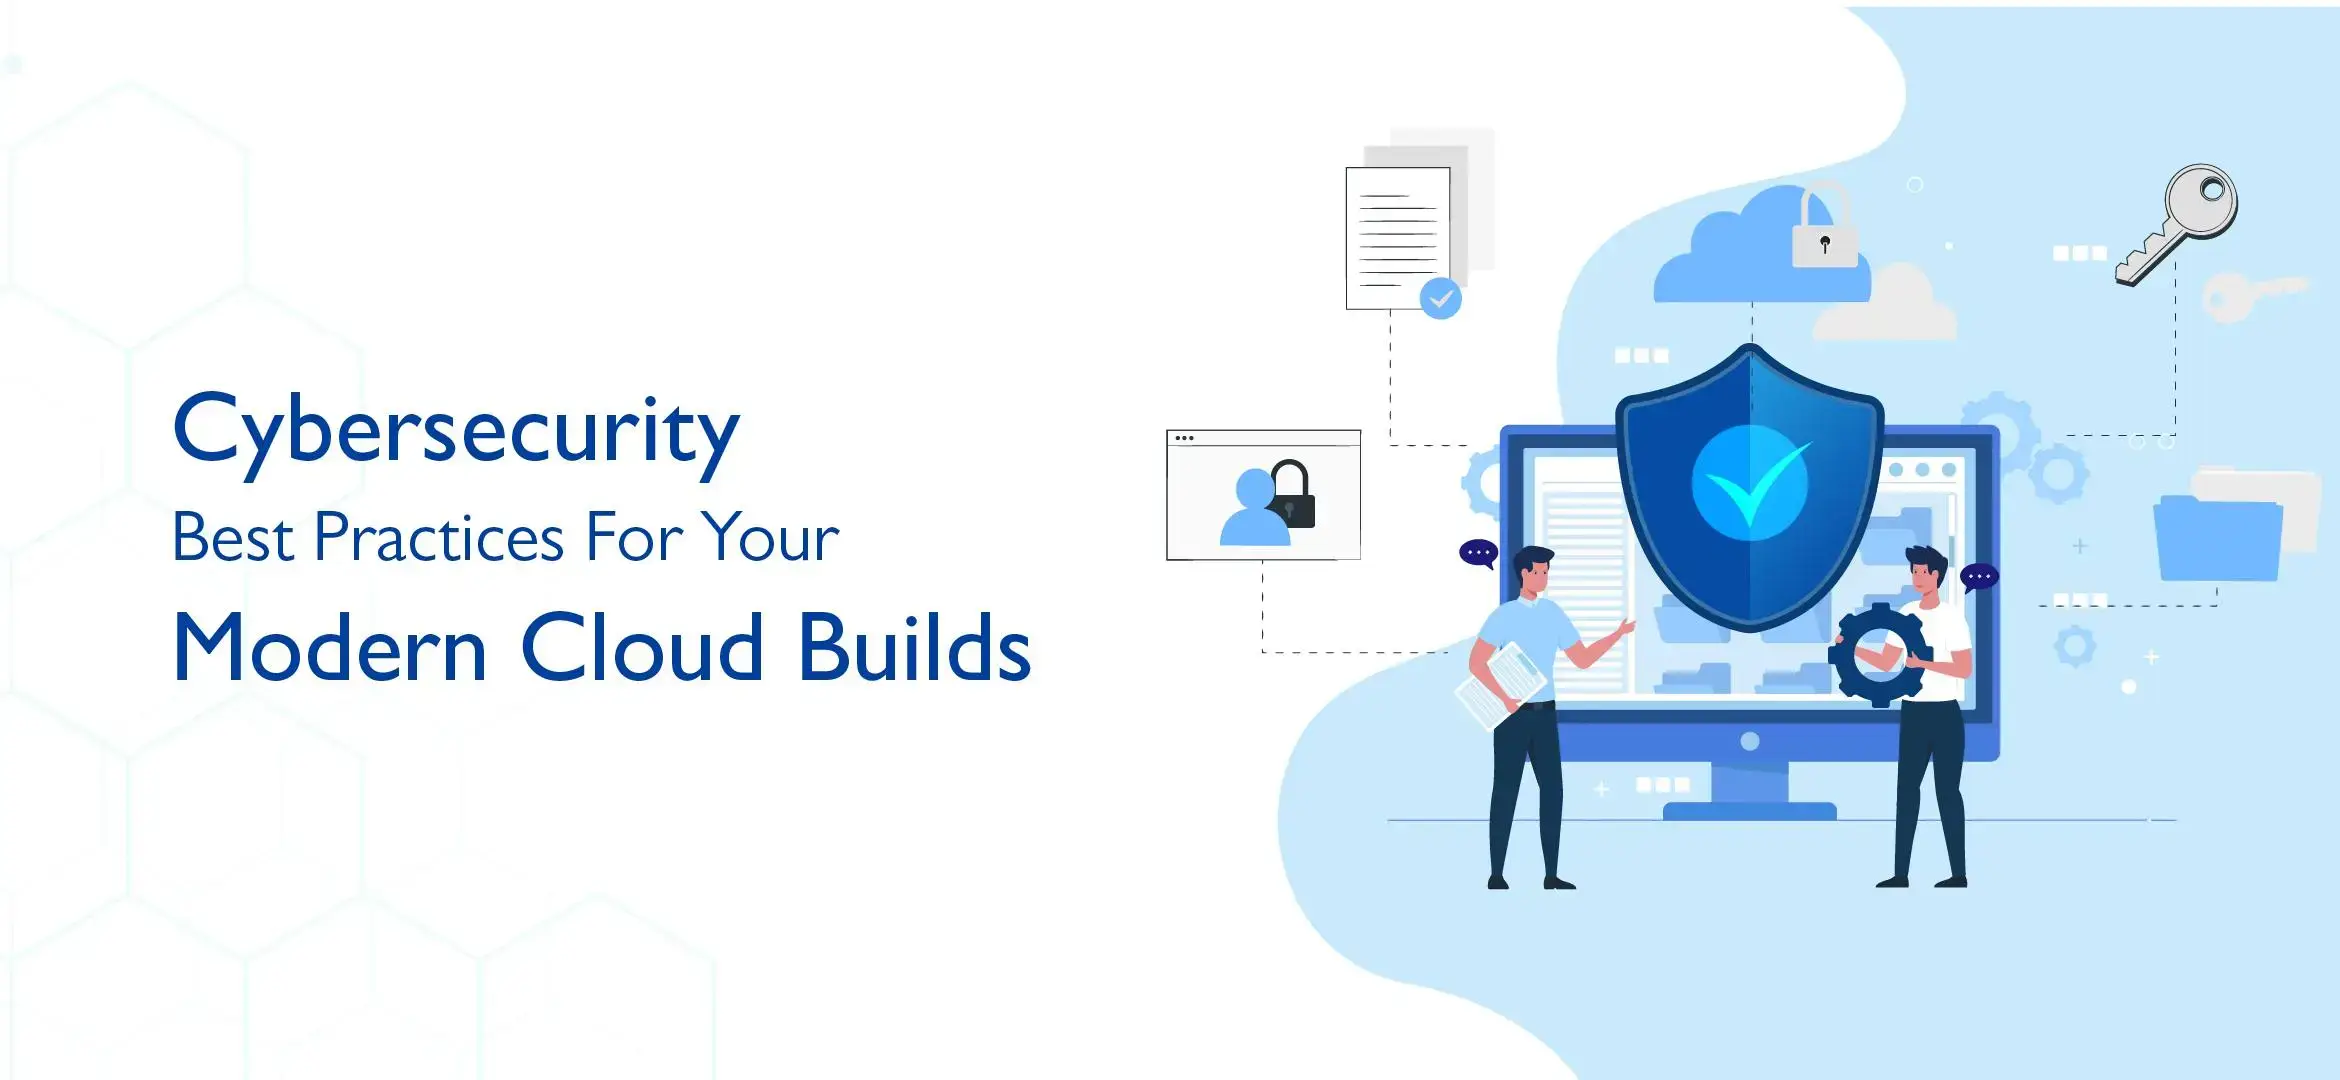 Check Out Cybersecurity Best Practices for Your Modern Cloud Builds